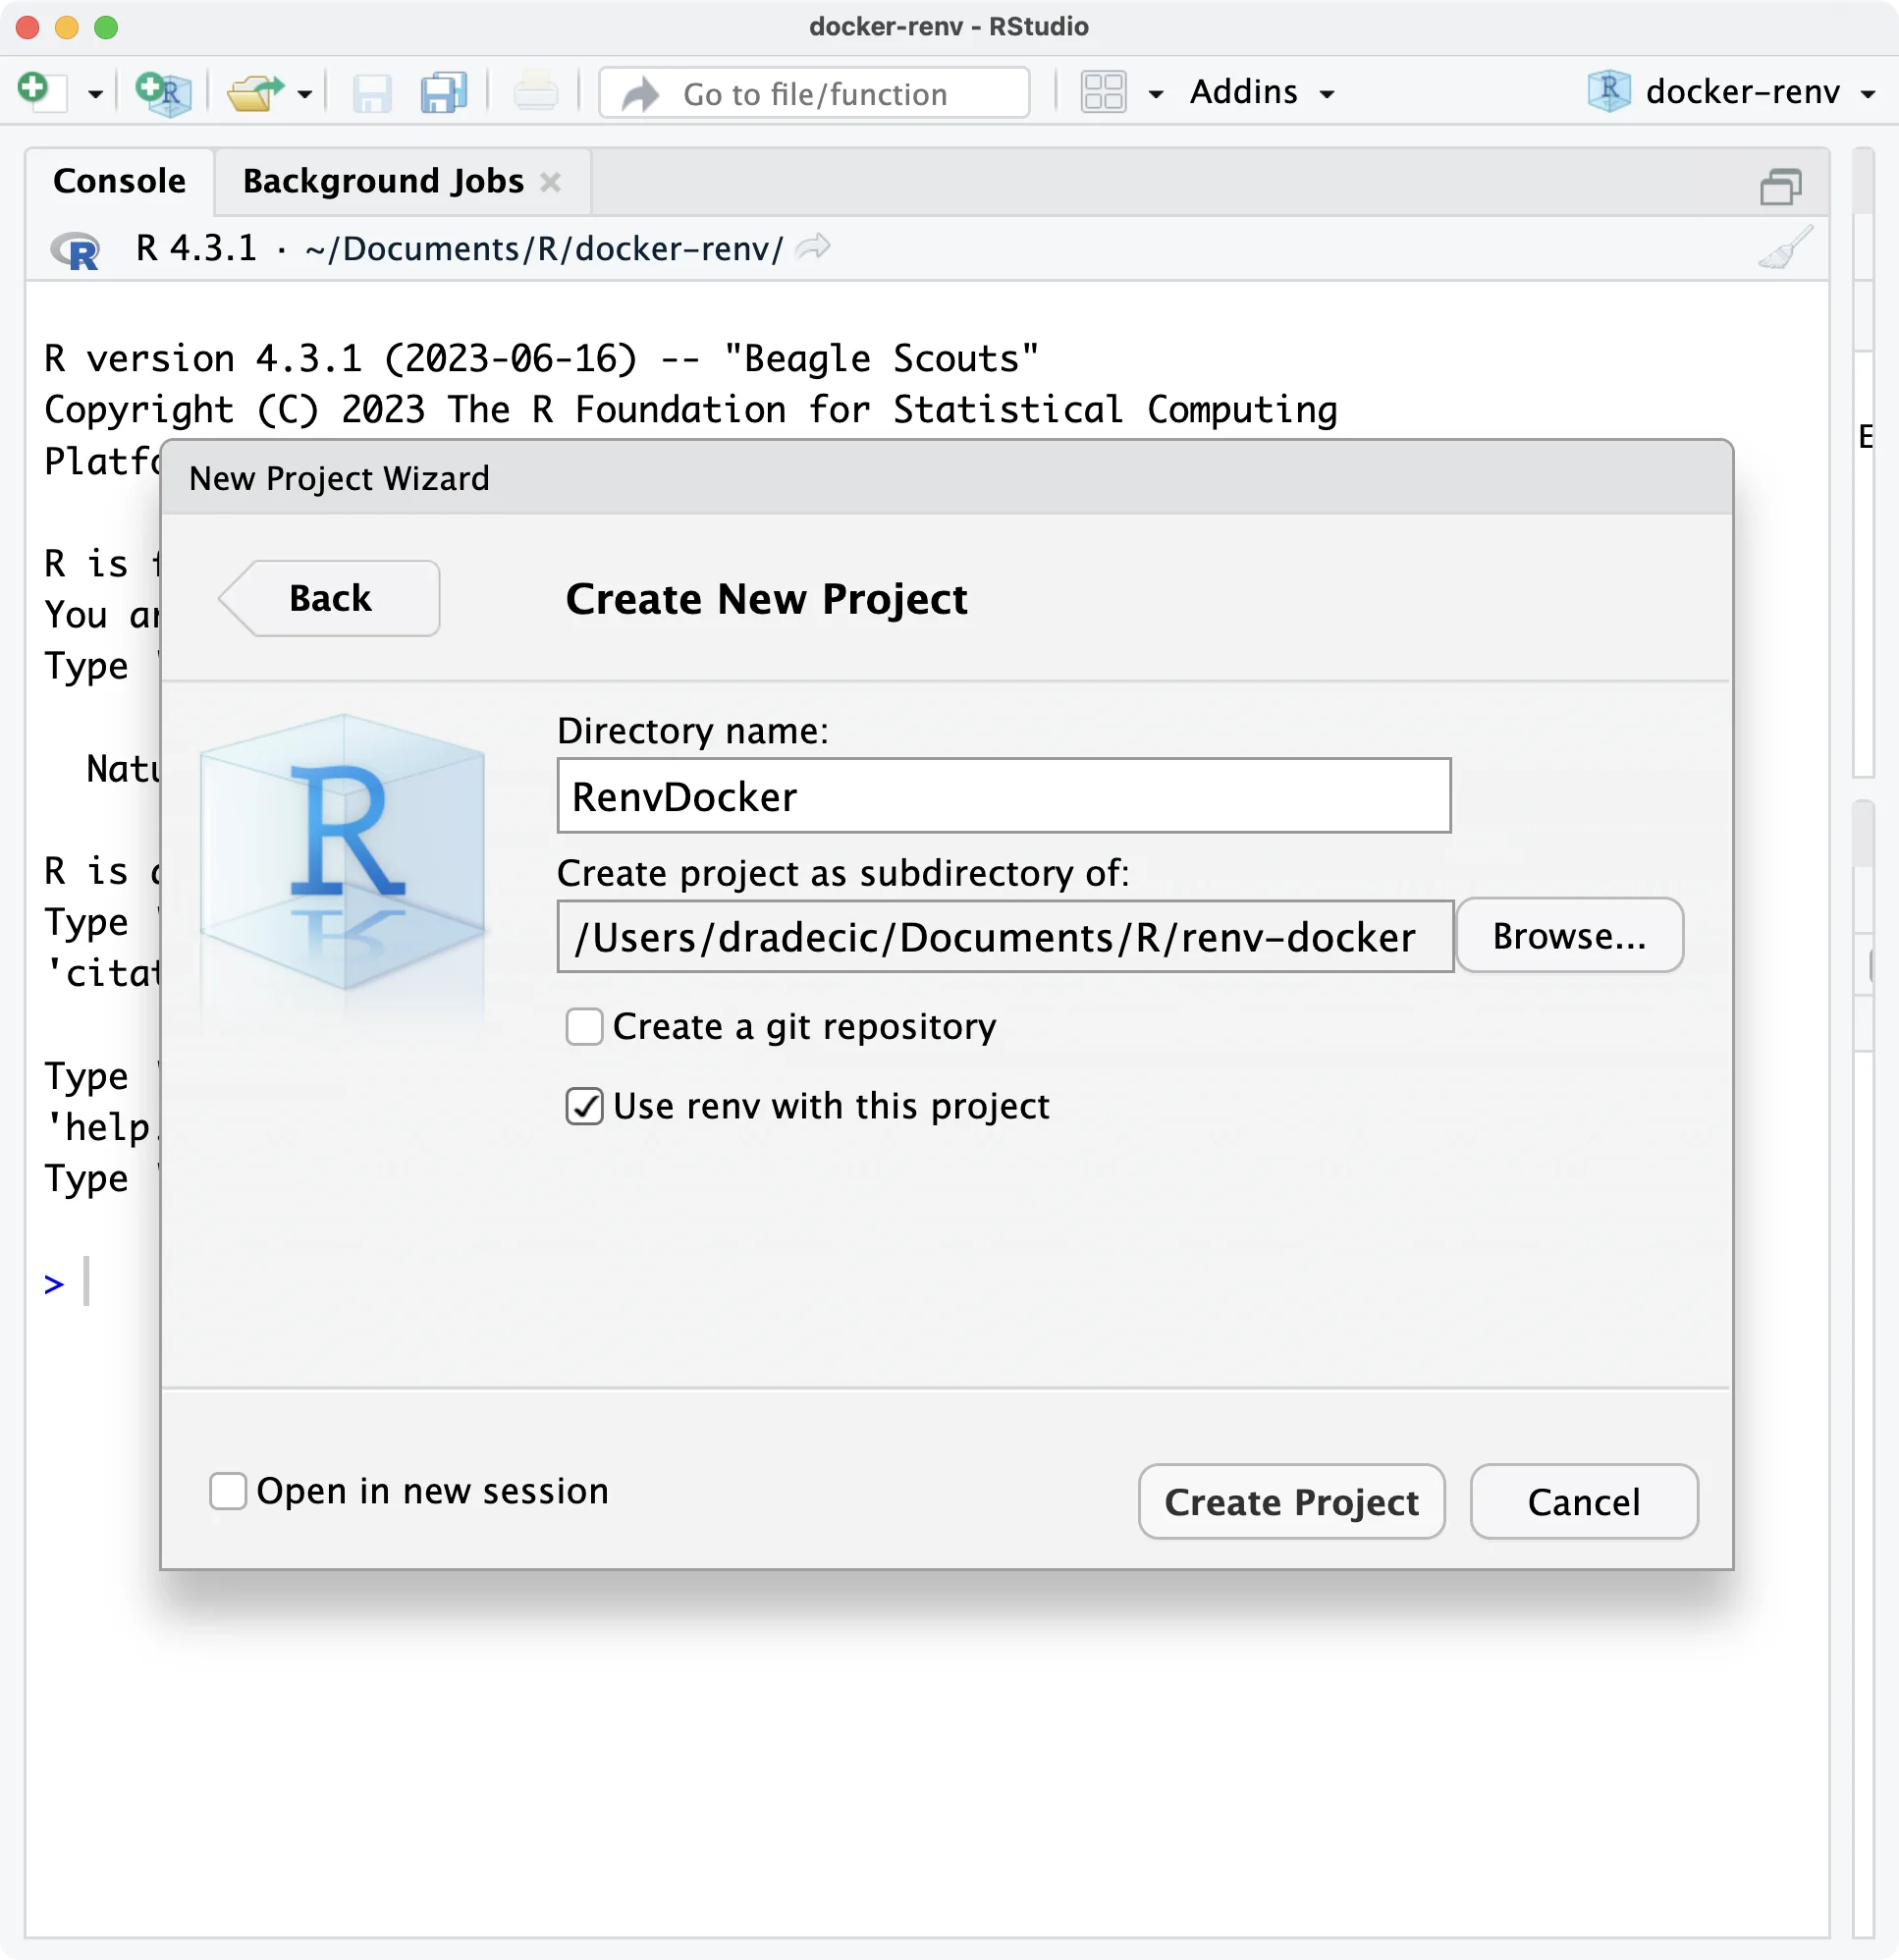 Image 1 - Creating a new project in RStudio